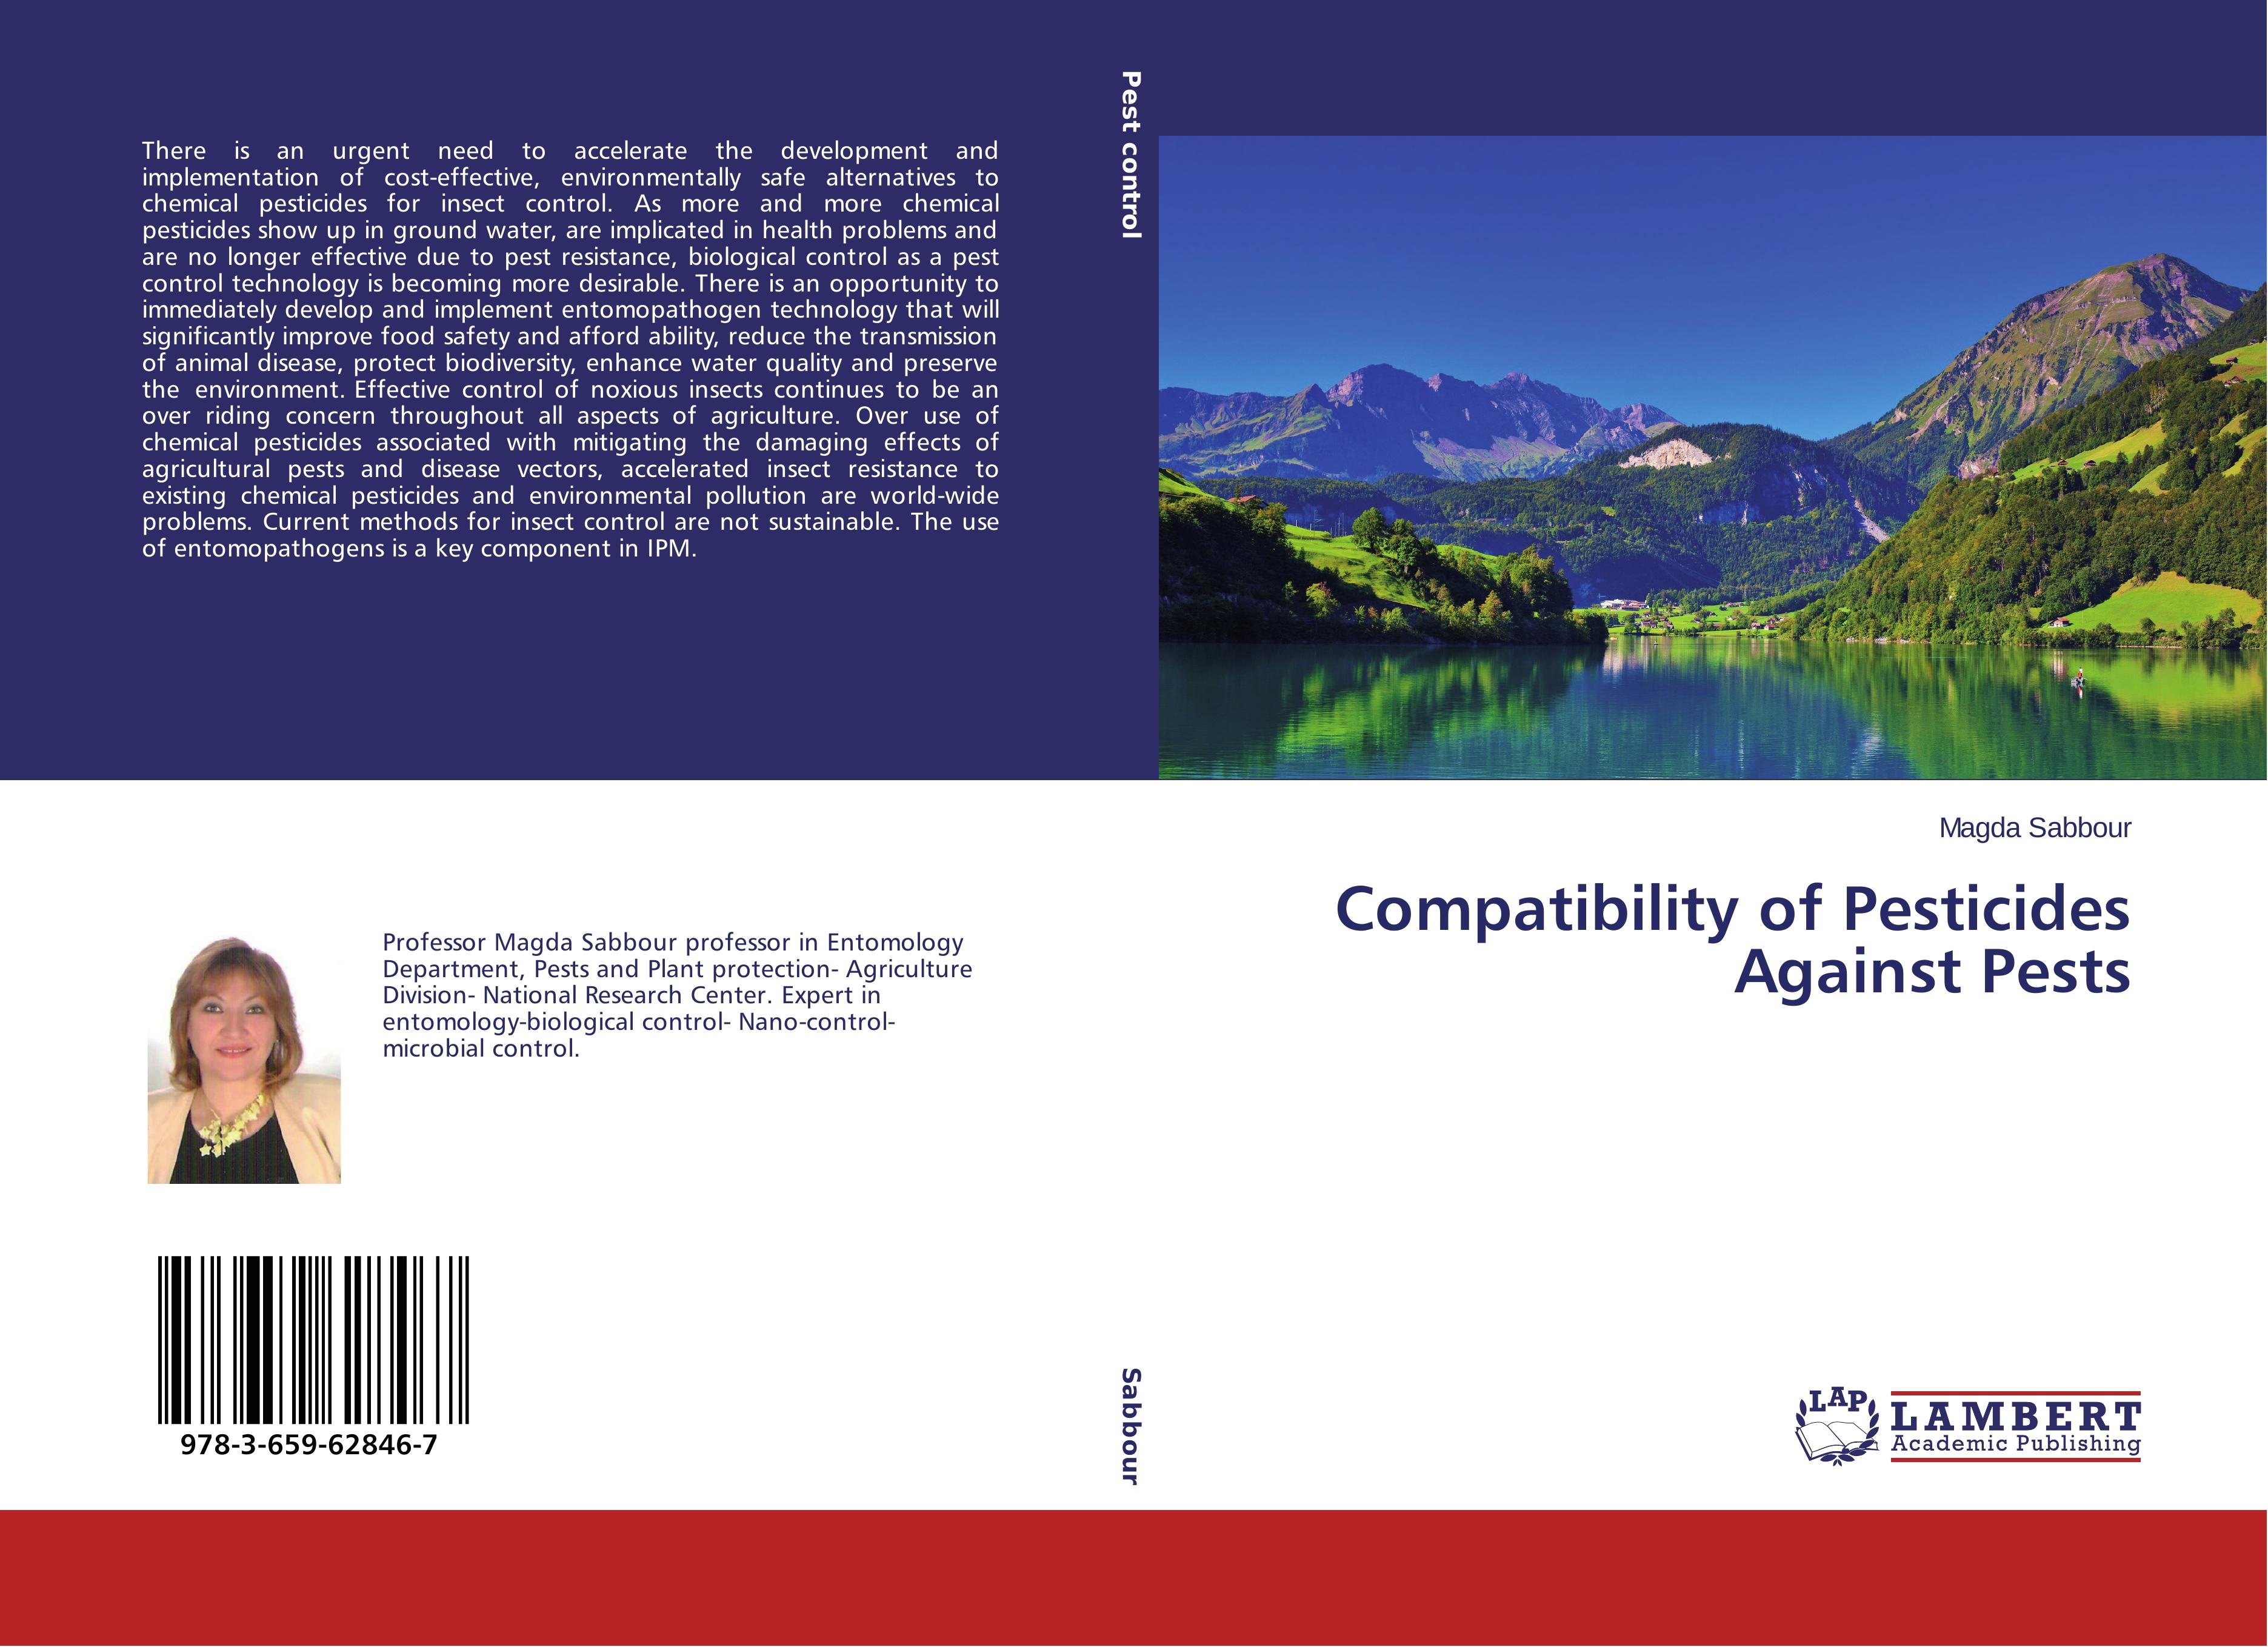 Compatibility of Pesticides Against Pests | Magda Sabbour | Taschenbuch | Paperback | 112 S. | Englisch | 2014 | LAP LAMBERT Academic Publishing | EAN 9783659628467 - Sabbour, Magda